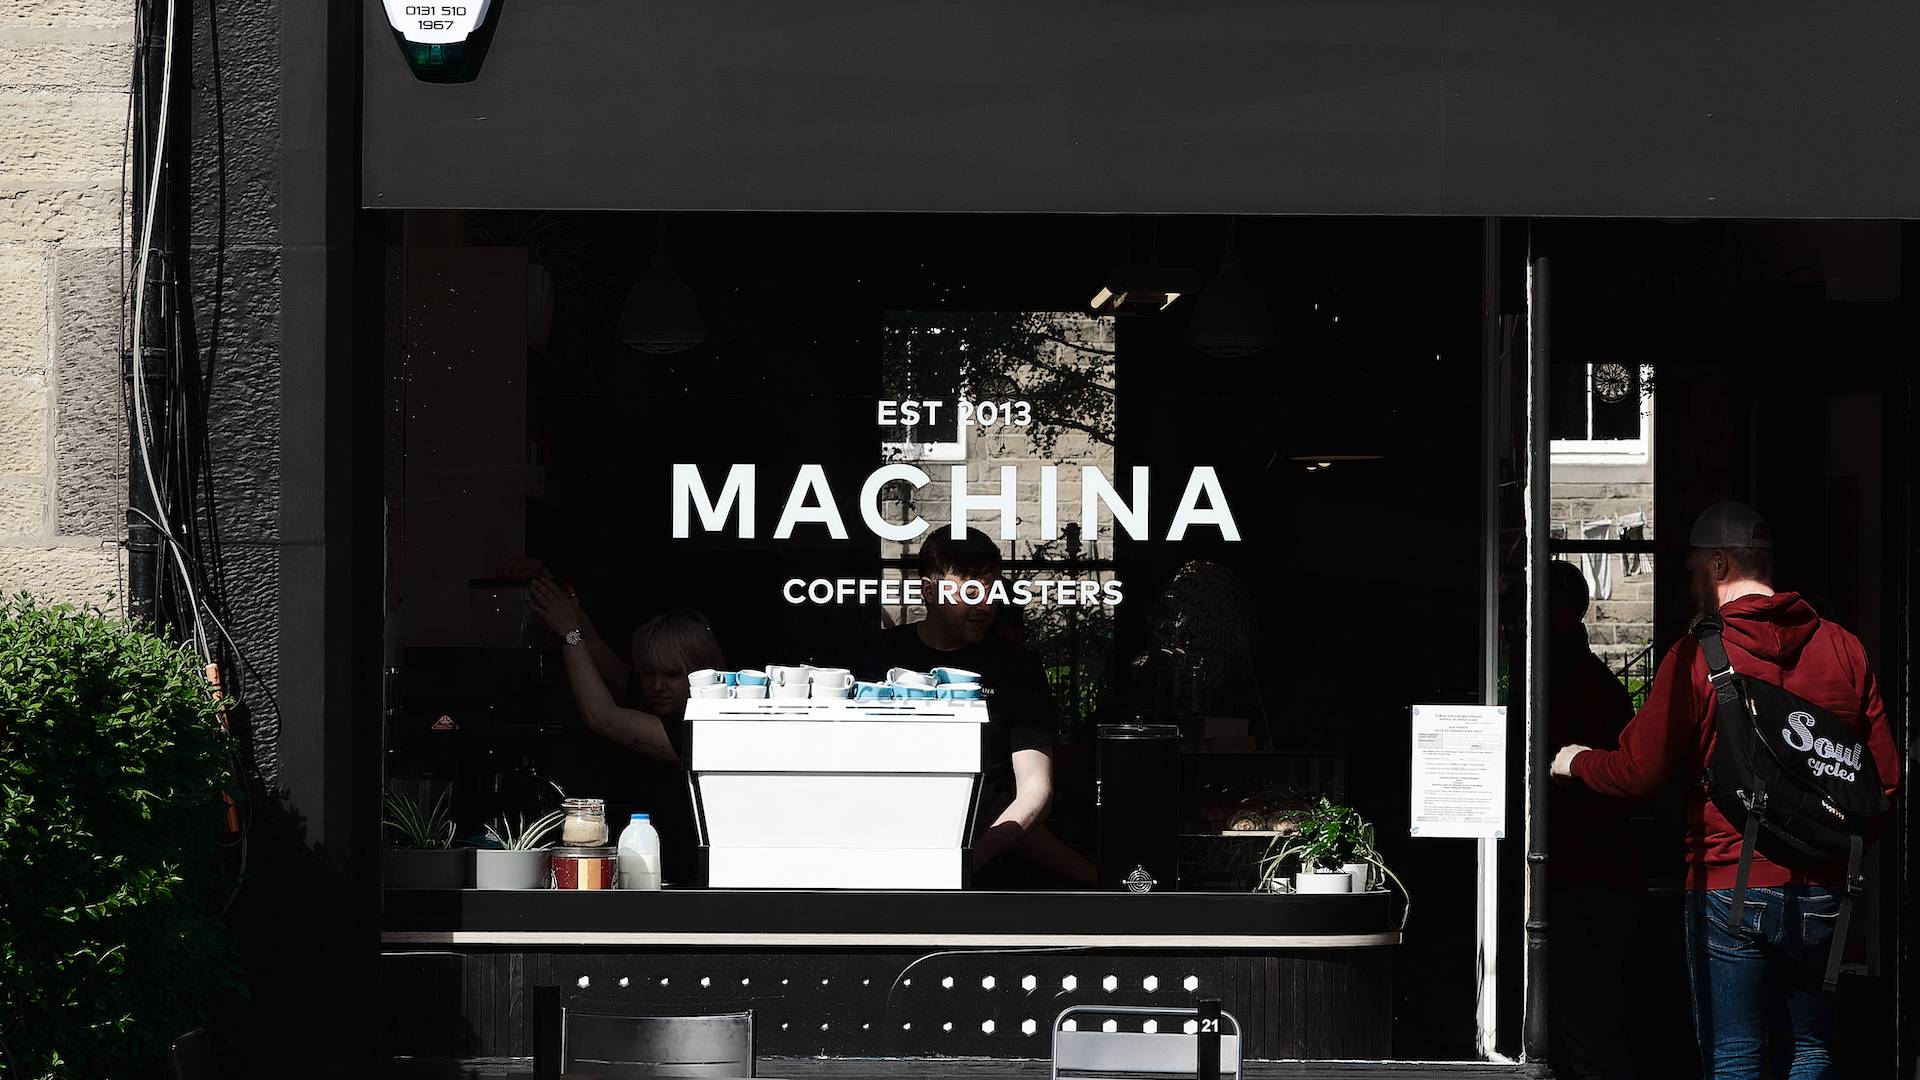 The shopfront for Machina Coffee. Black panelling with the company logo on the window in white.,© Machina Coffee